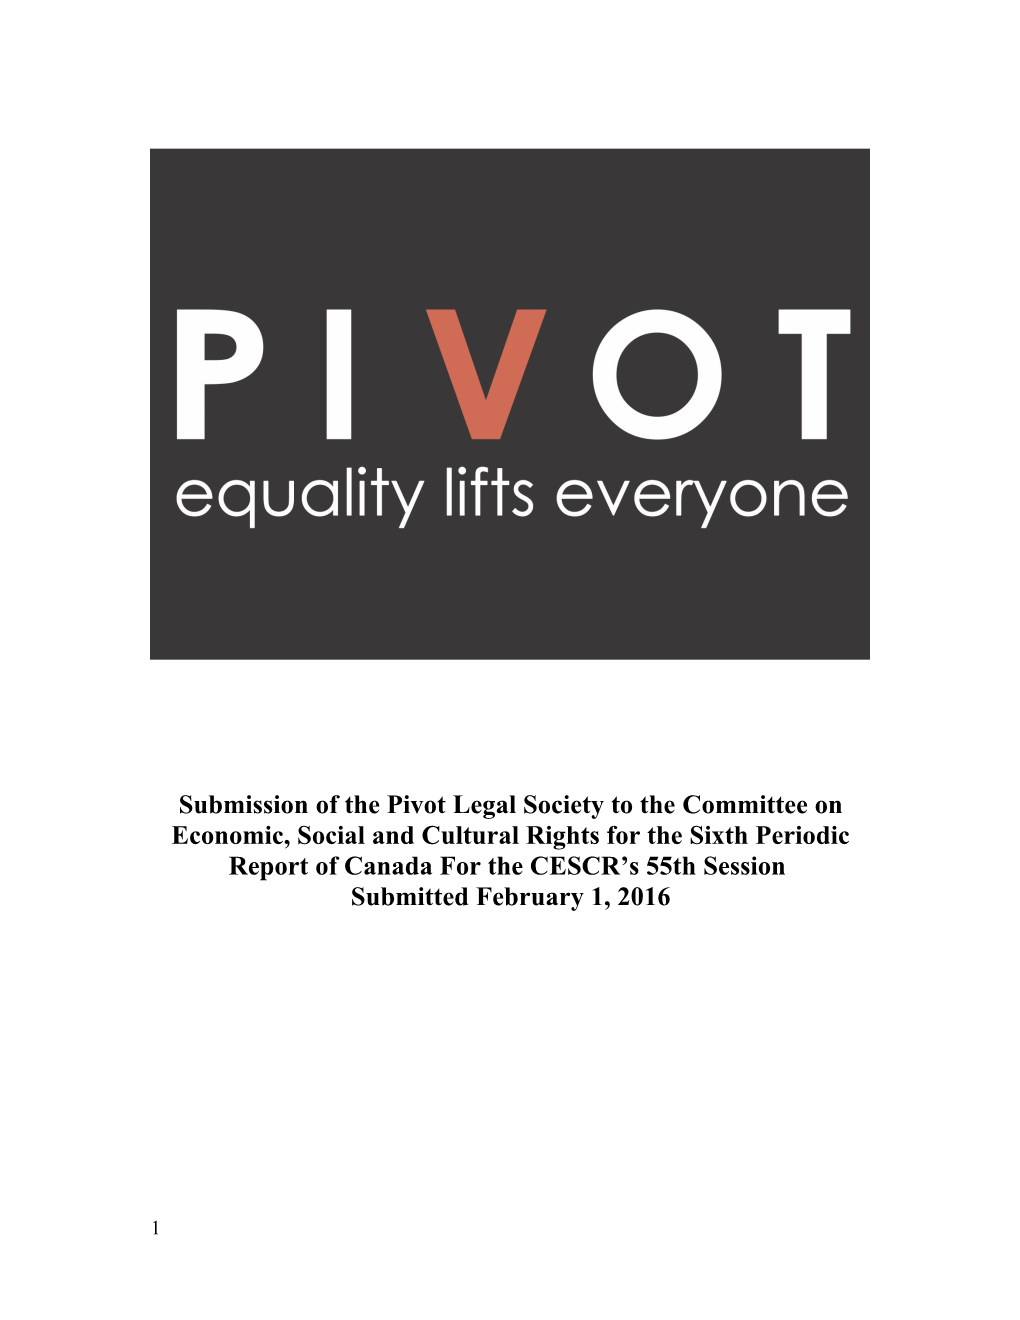 Submission of the Pivot Legal Society to the Committee on Economic, Social and Cultural